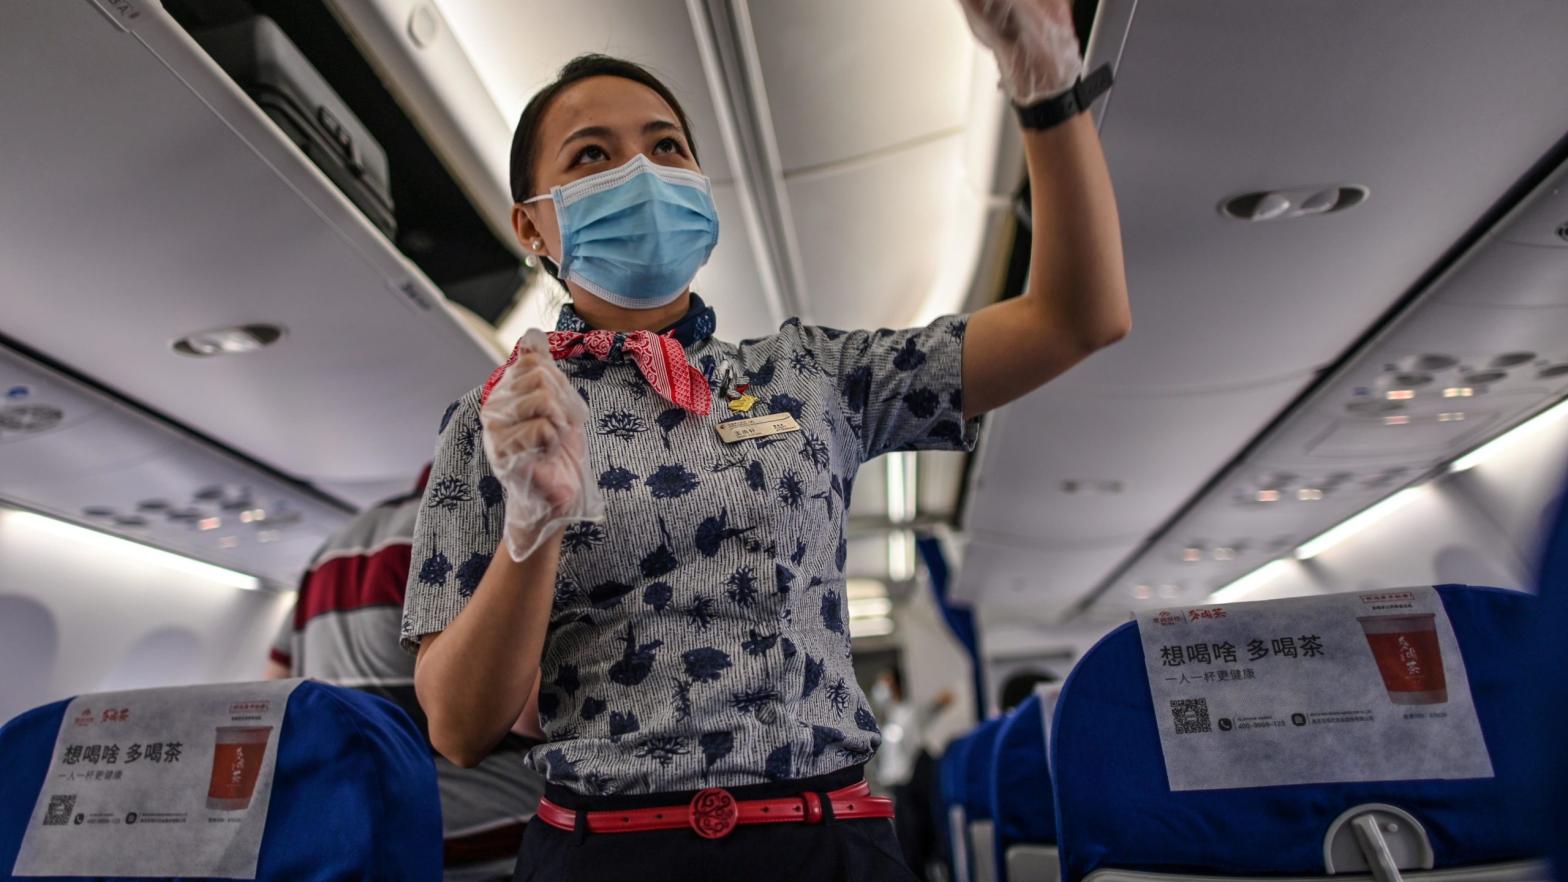 A flight attendant wearing a facemask on a flight to Shanghai at Tianhe Airport in Wuhan, in Chinas central Hubei province on May 29, 2020. (Photo: Getty Images)